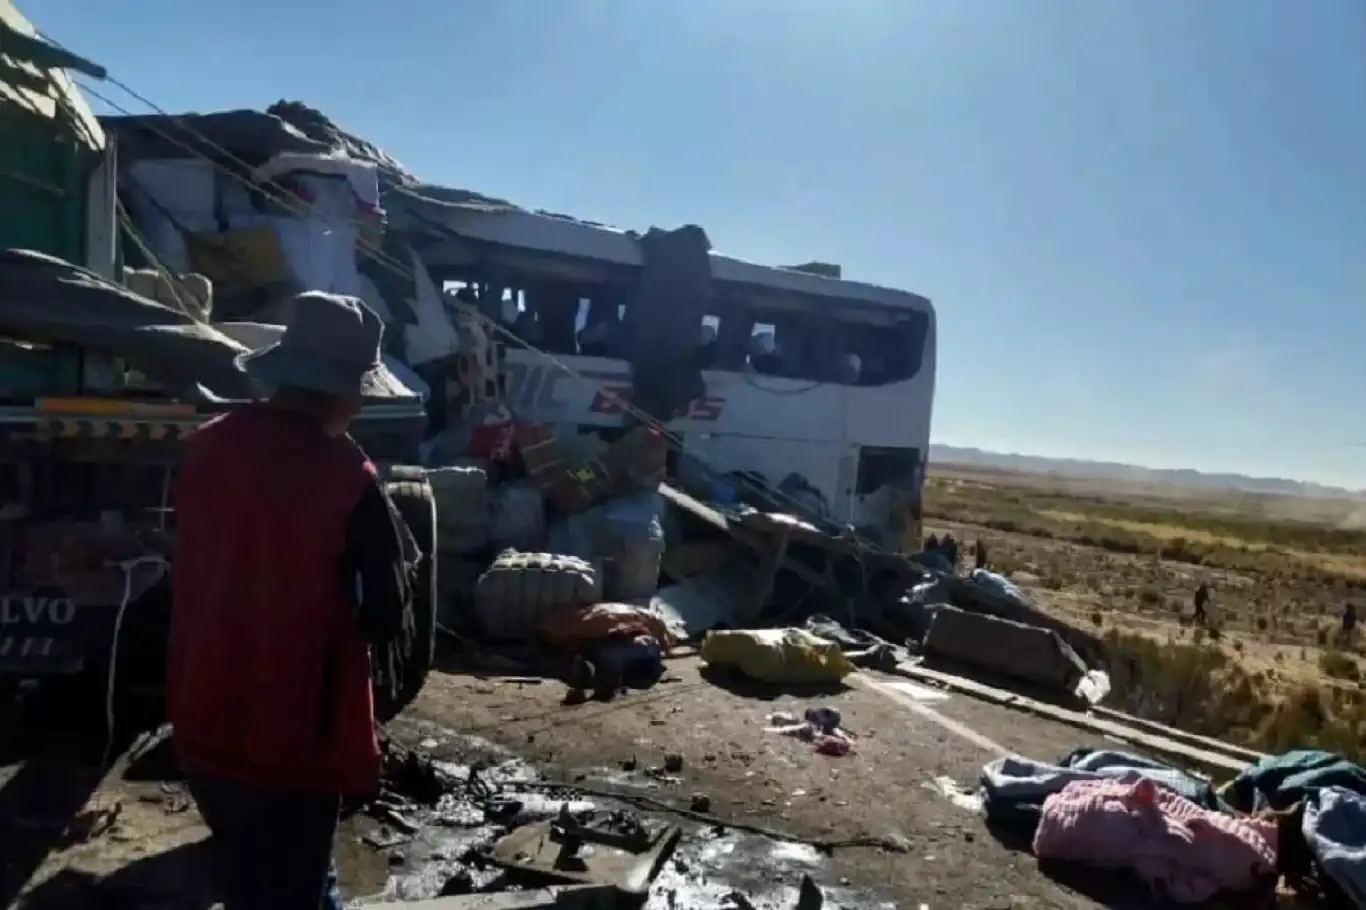 At least 22 dead after truck and bus collide in Bolivian Andes